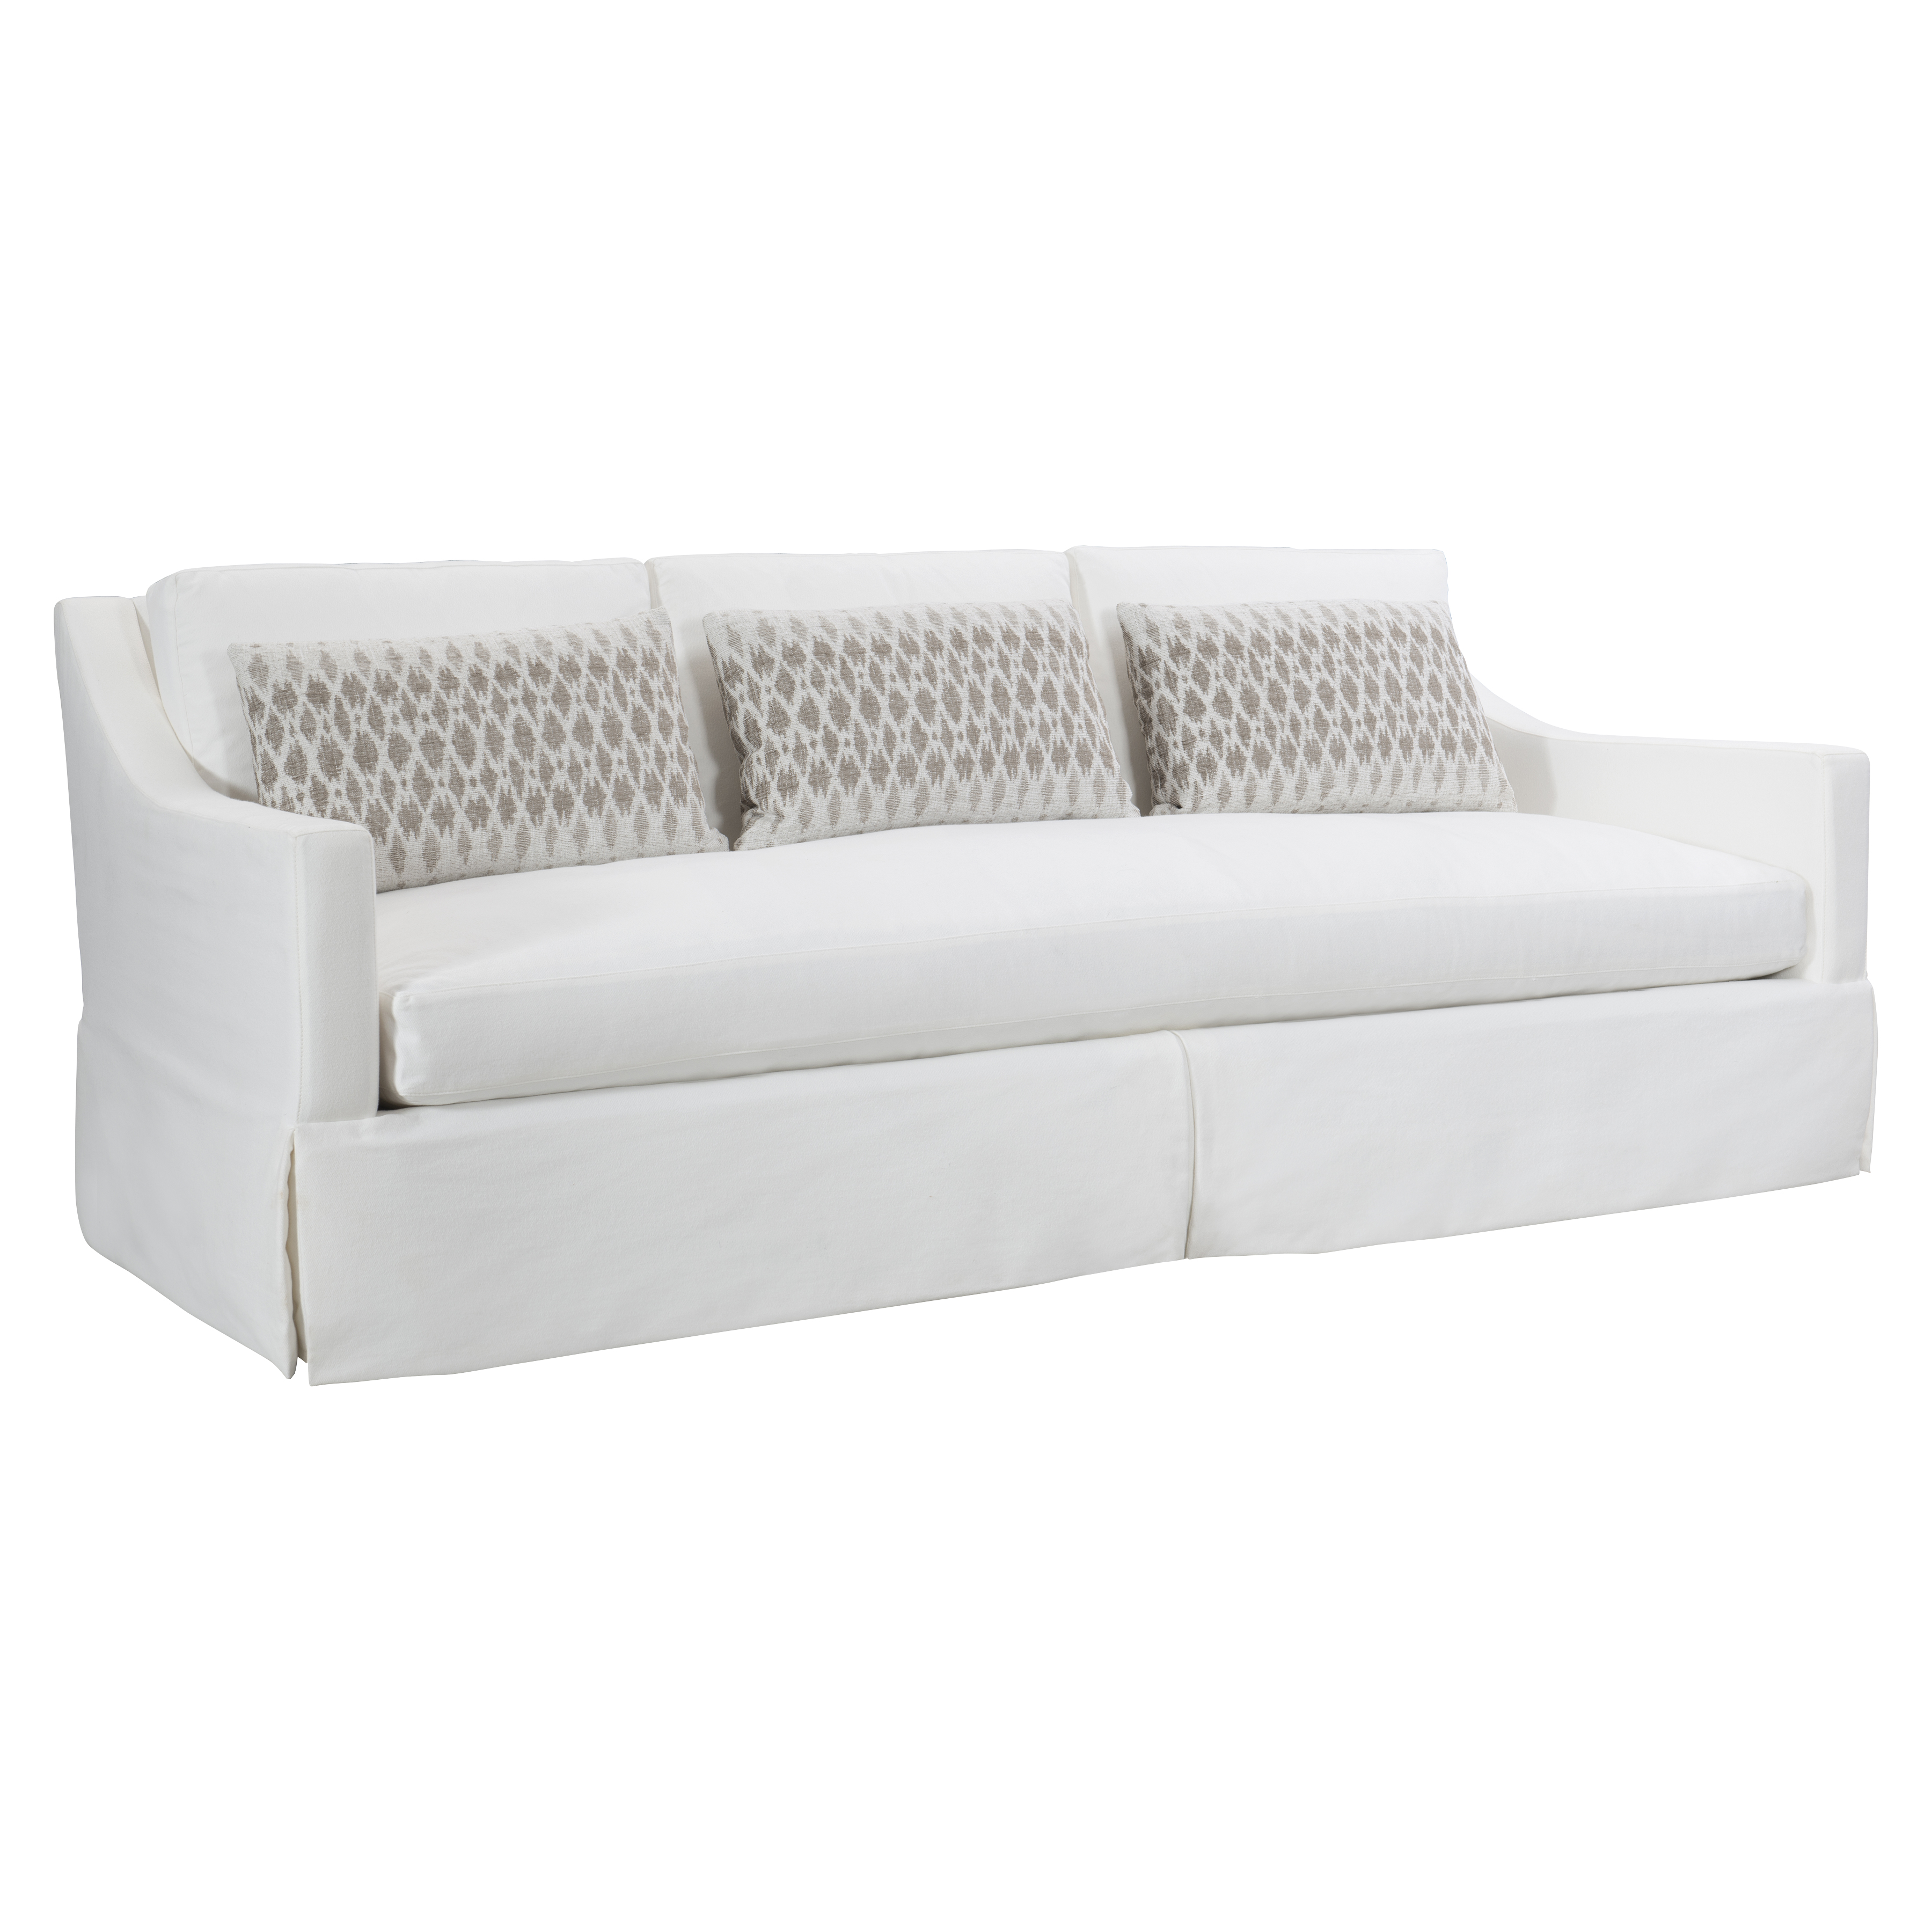 Picture of ALBION SOFA